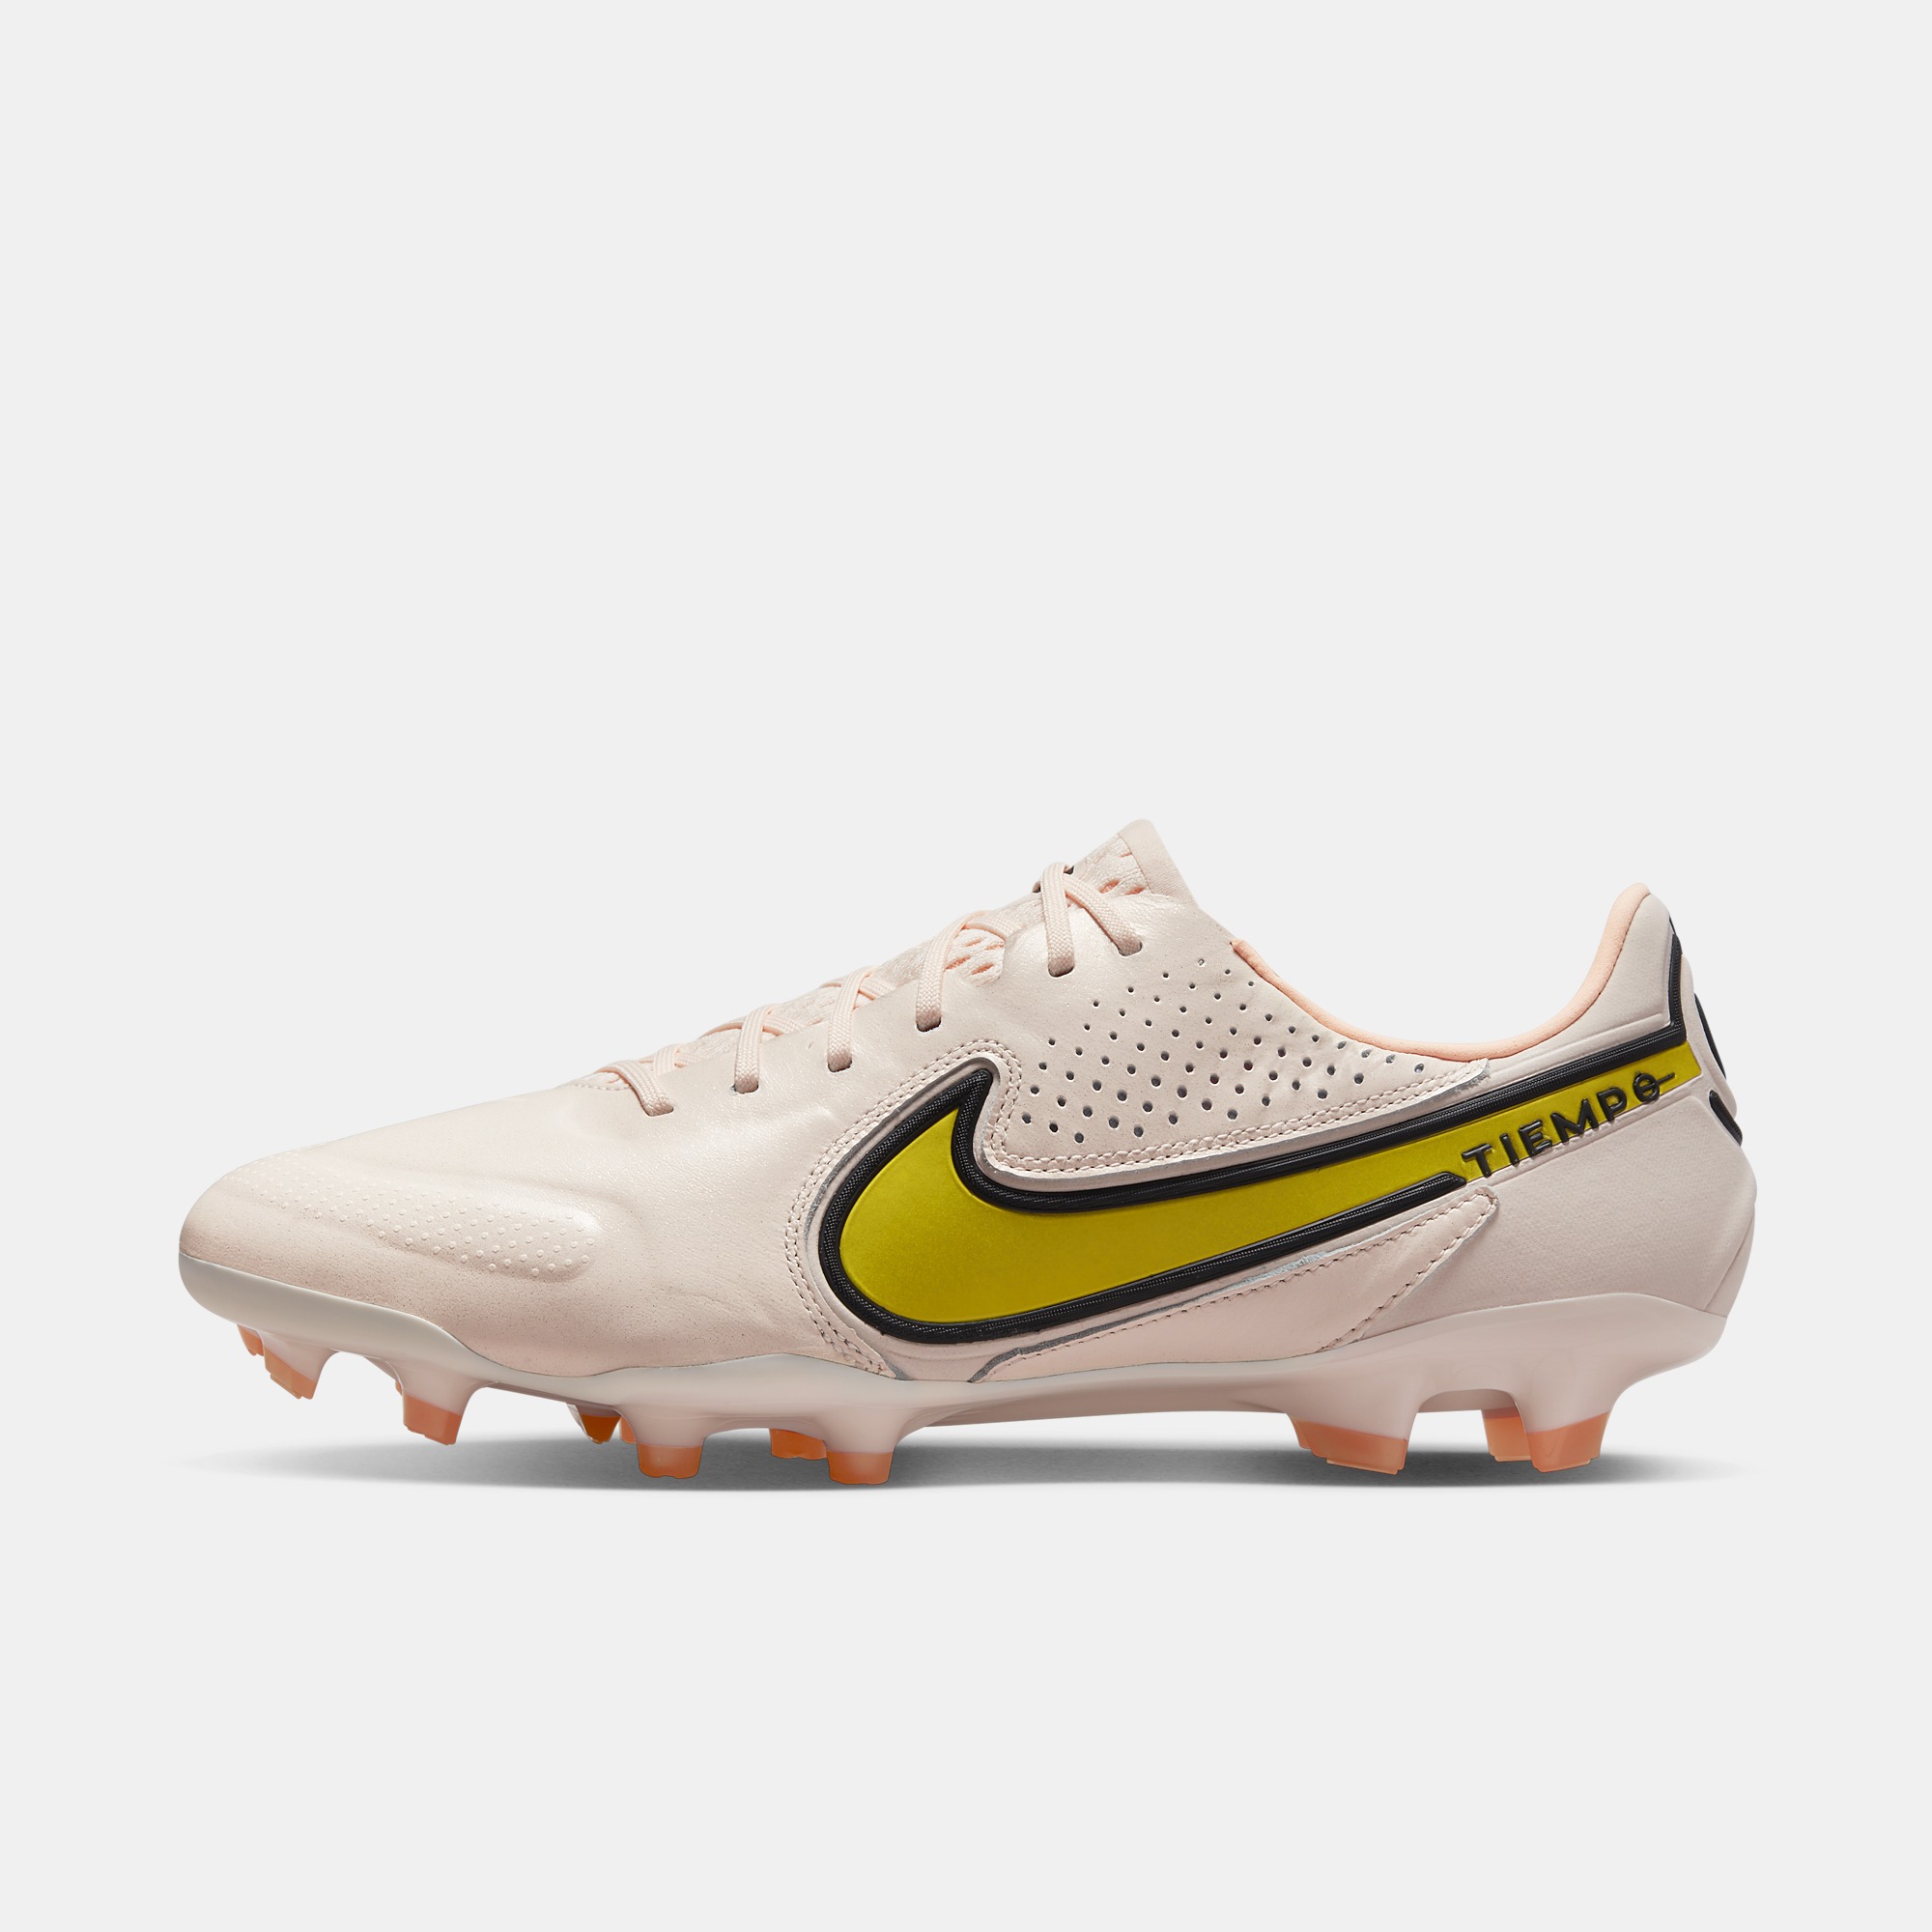 stefanssoccer.com:Nike Legend 9 Elite Firm Ground Soccer Cleats - Guava Ice / Sunset / Yellow Strike